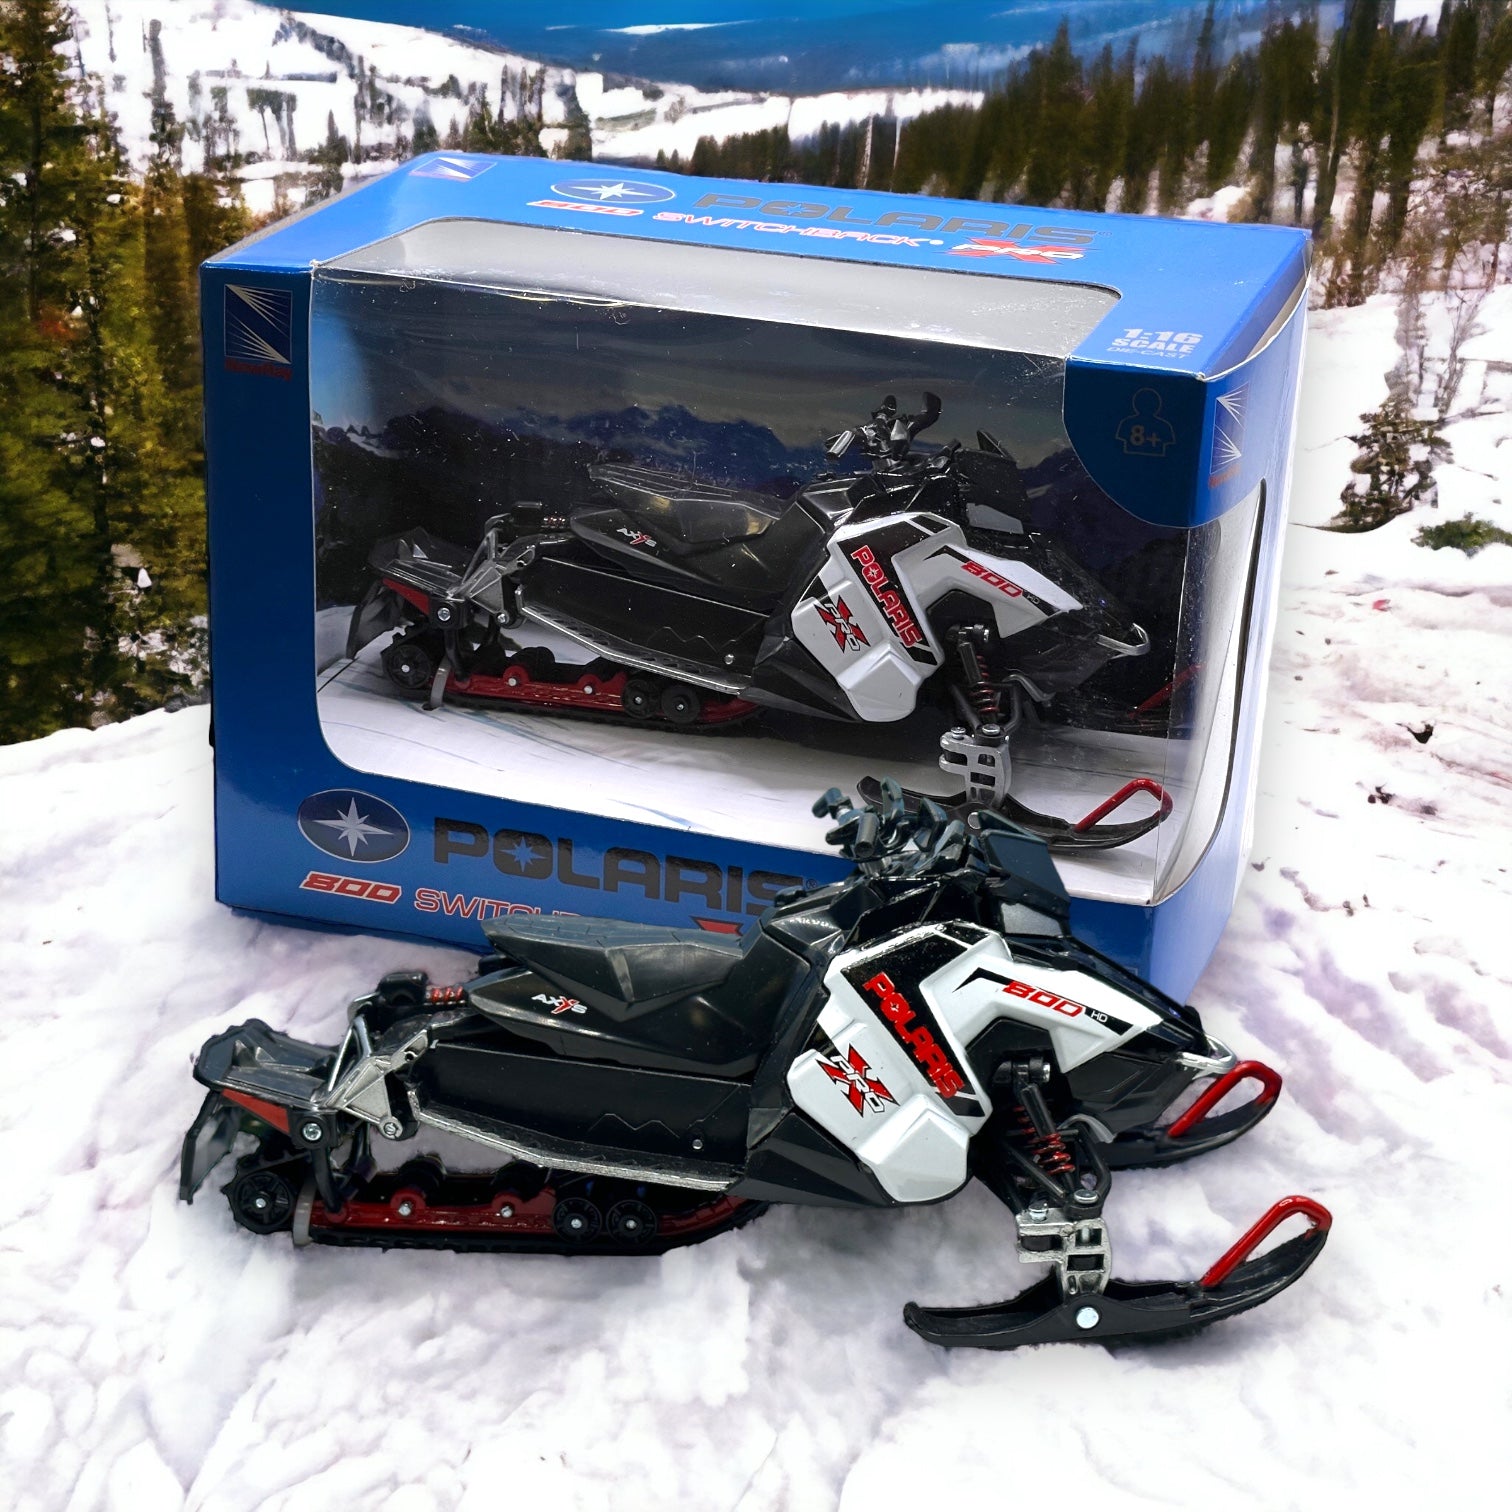 A Polaris Snowmobile Toy replicating what we use on the mountain